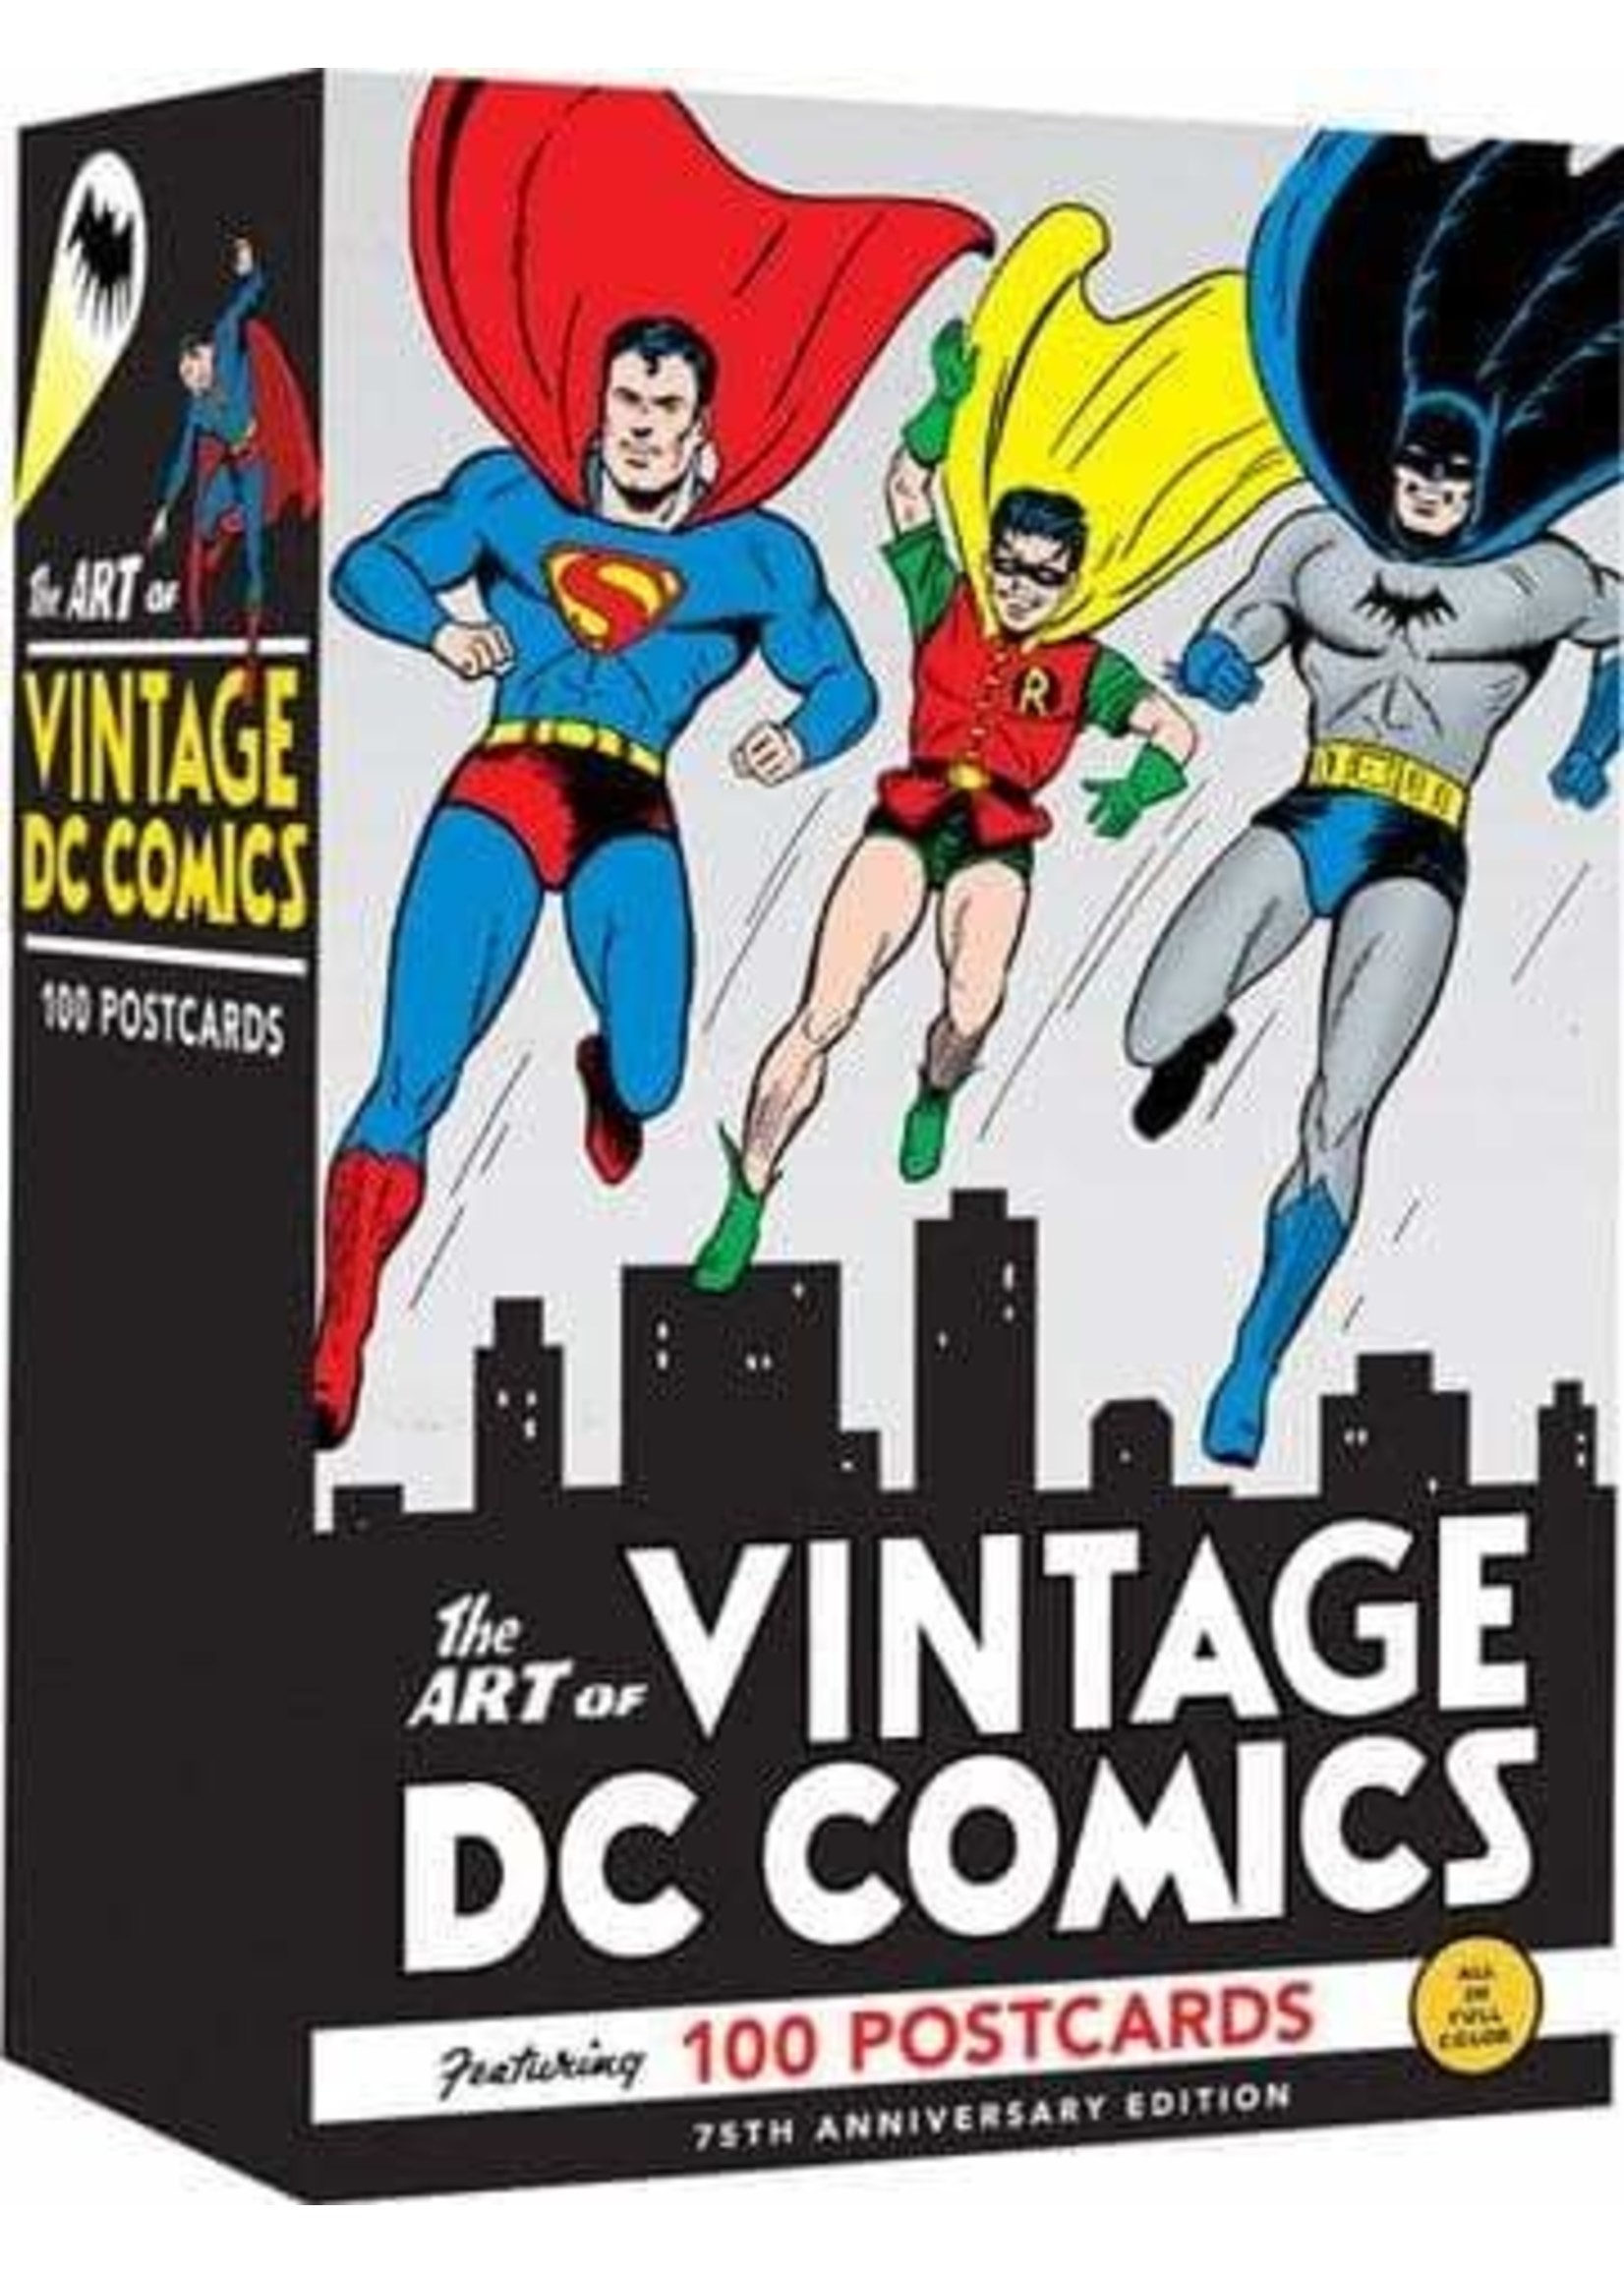 The Art of Vintage DC Comics Featuring 100 Postcards by DC Comics